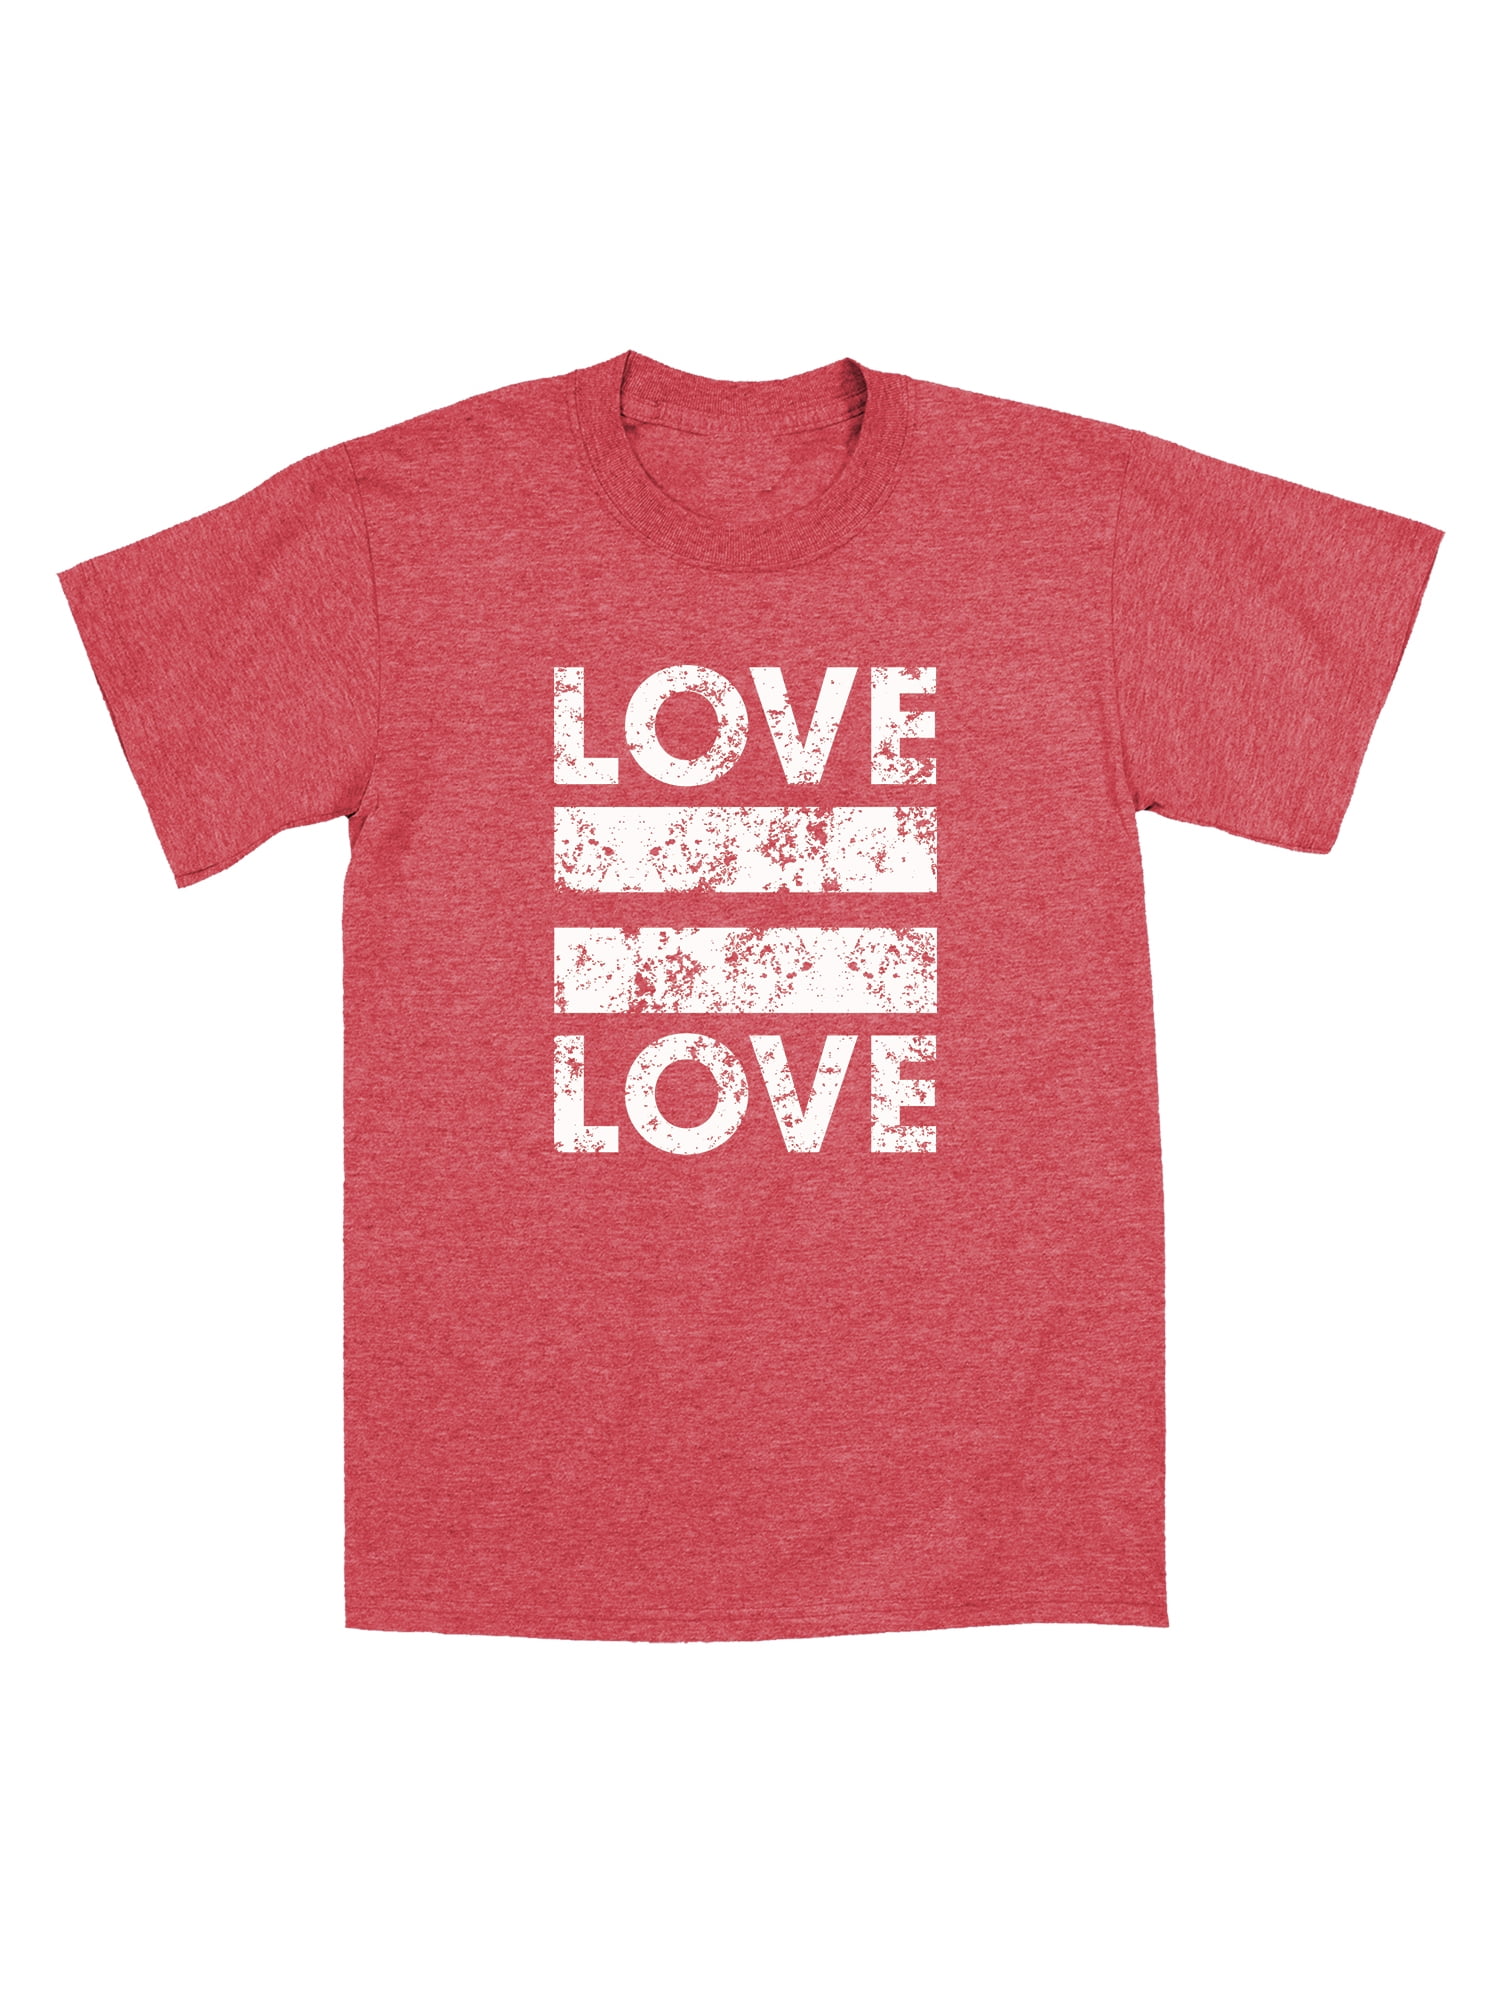 Instant Message - Love Love Equality News Mens T-Shirt - Heather red - 2 X-Large - Walmart.com